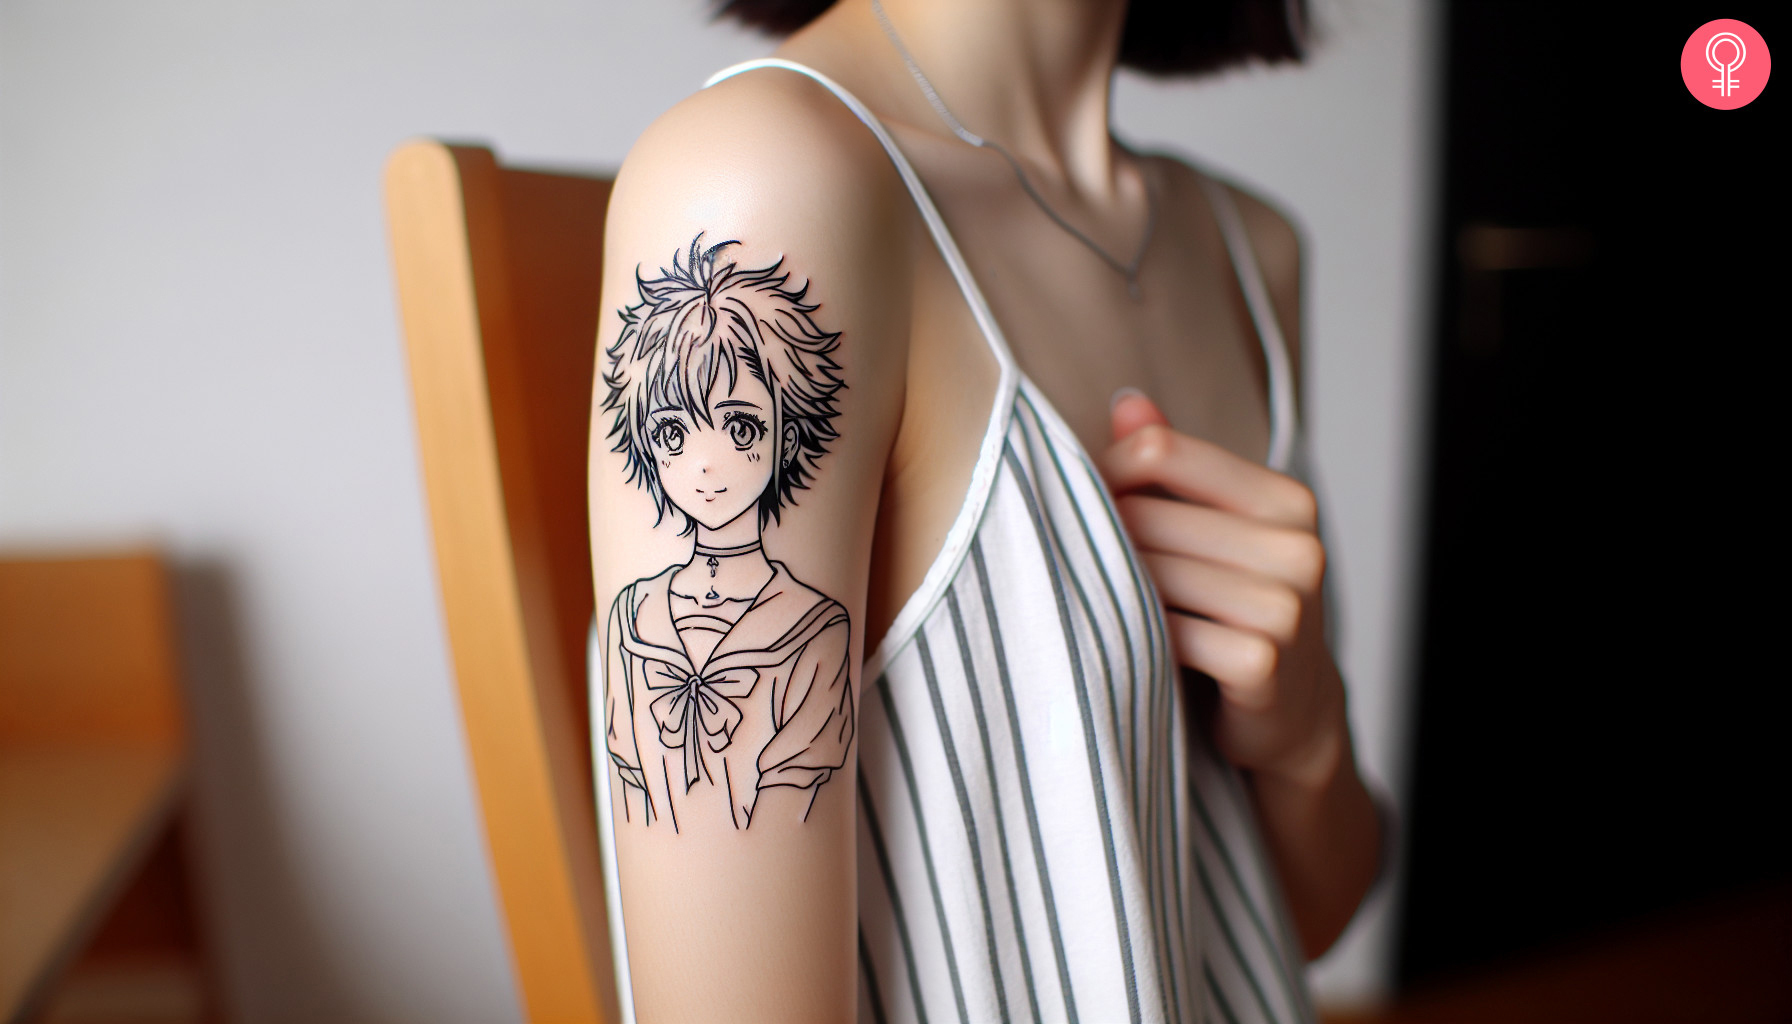 Anime outline tattoo on a woman’s upper arm